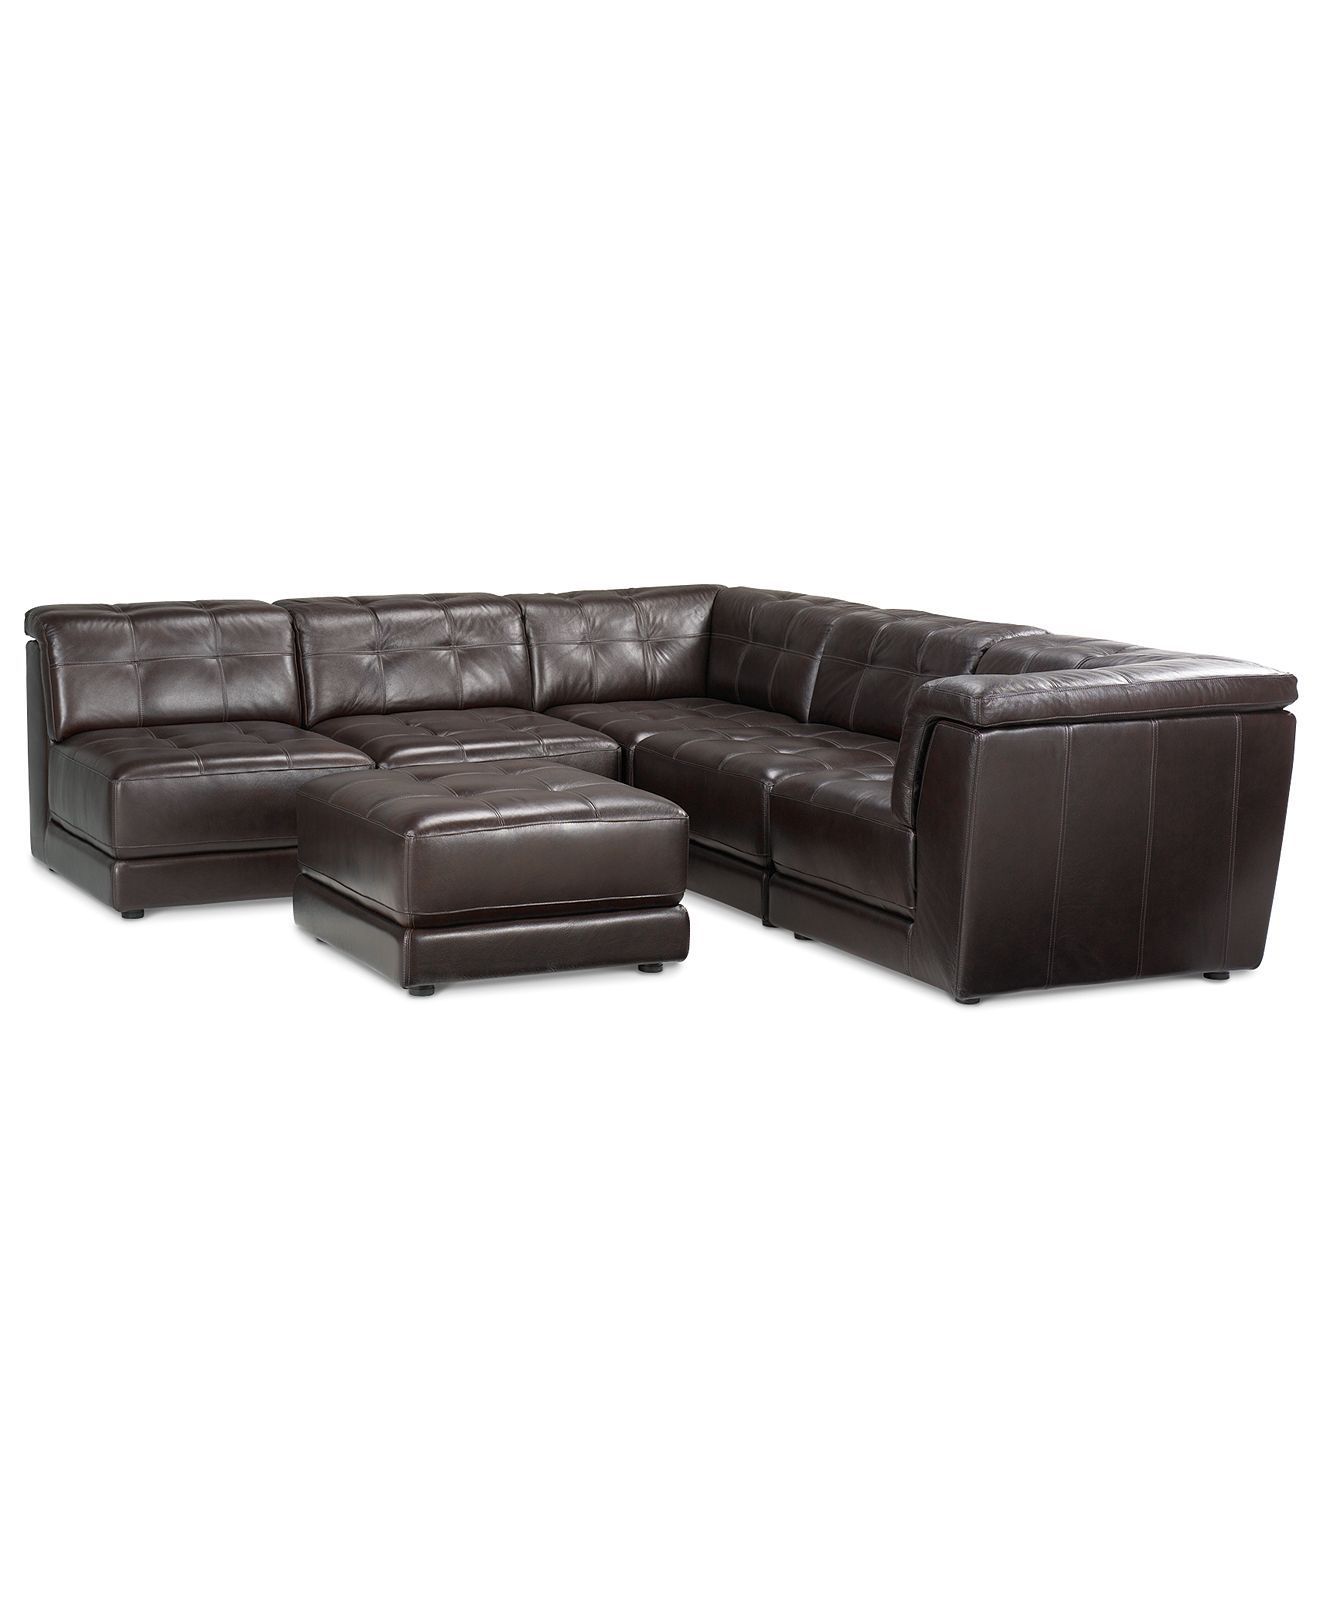 Macy's Stacey Leather Sectional Sofa, 6 Piece Modular (3 Armless In 6 Piece Leather Sectional Sofas (View 10 of 10)